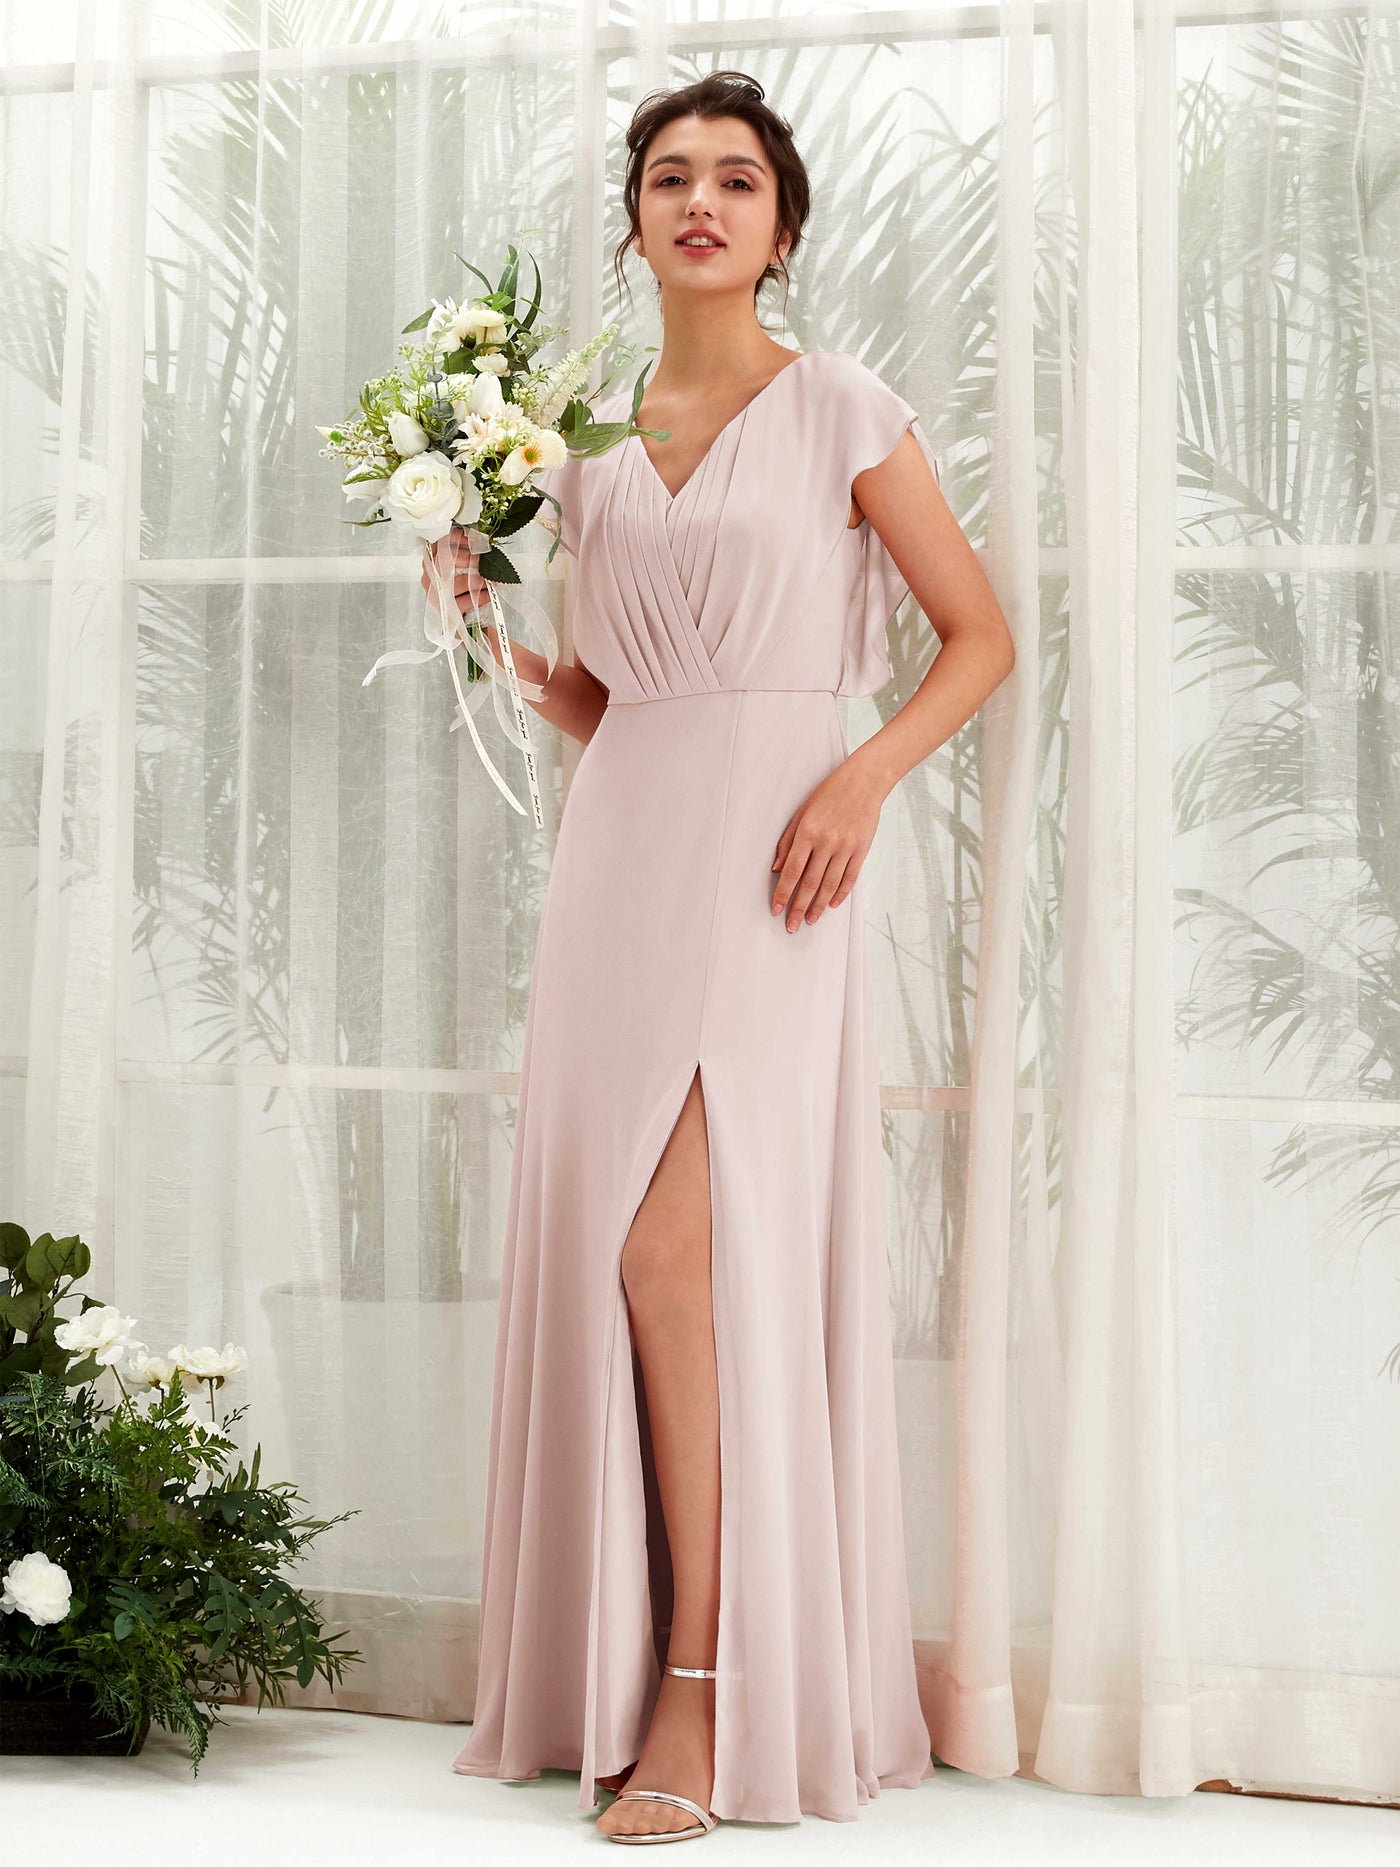 Biscotti Bridesmaid Dresses Bridesmaid Dress A-line Chiffon V-neck Full Length Short Sleeves Wedding Party Dress (81225635)#color_biscotti